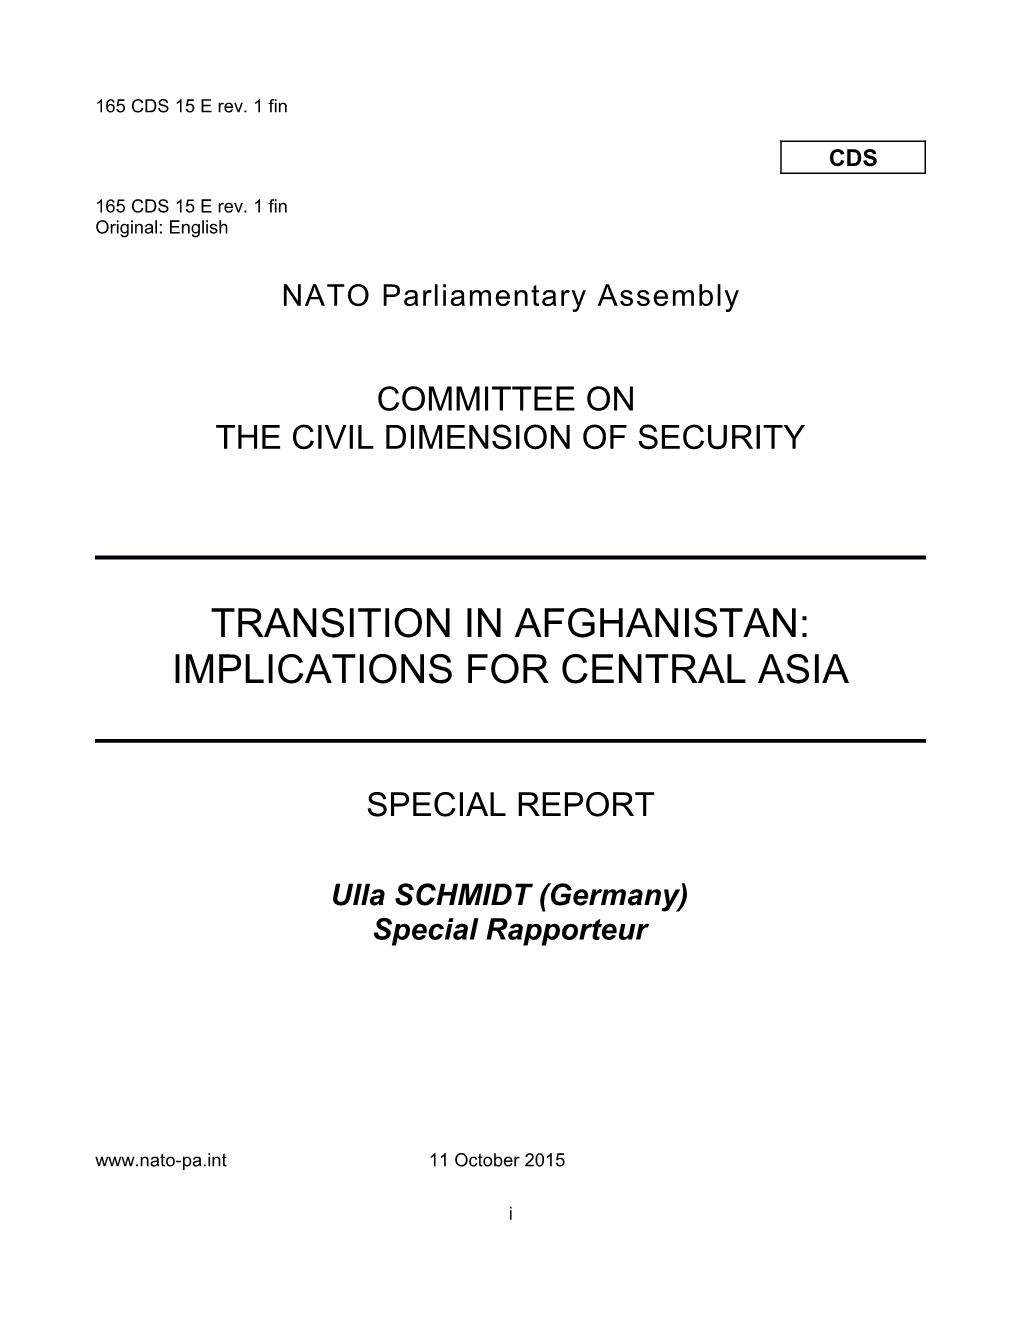 CDS 2015 Draft Special Report on Transition in Afghanistan